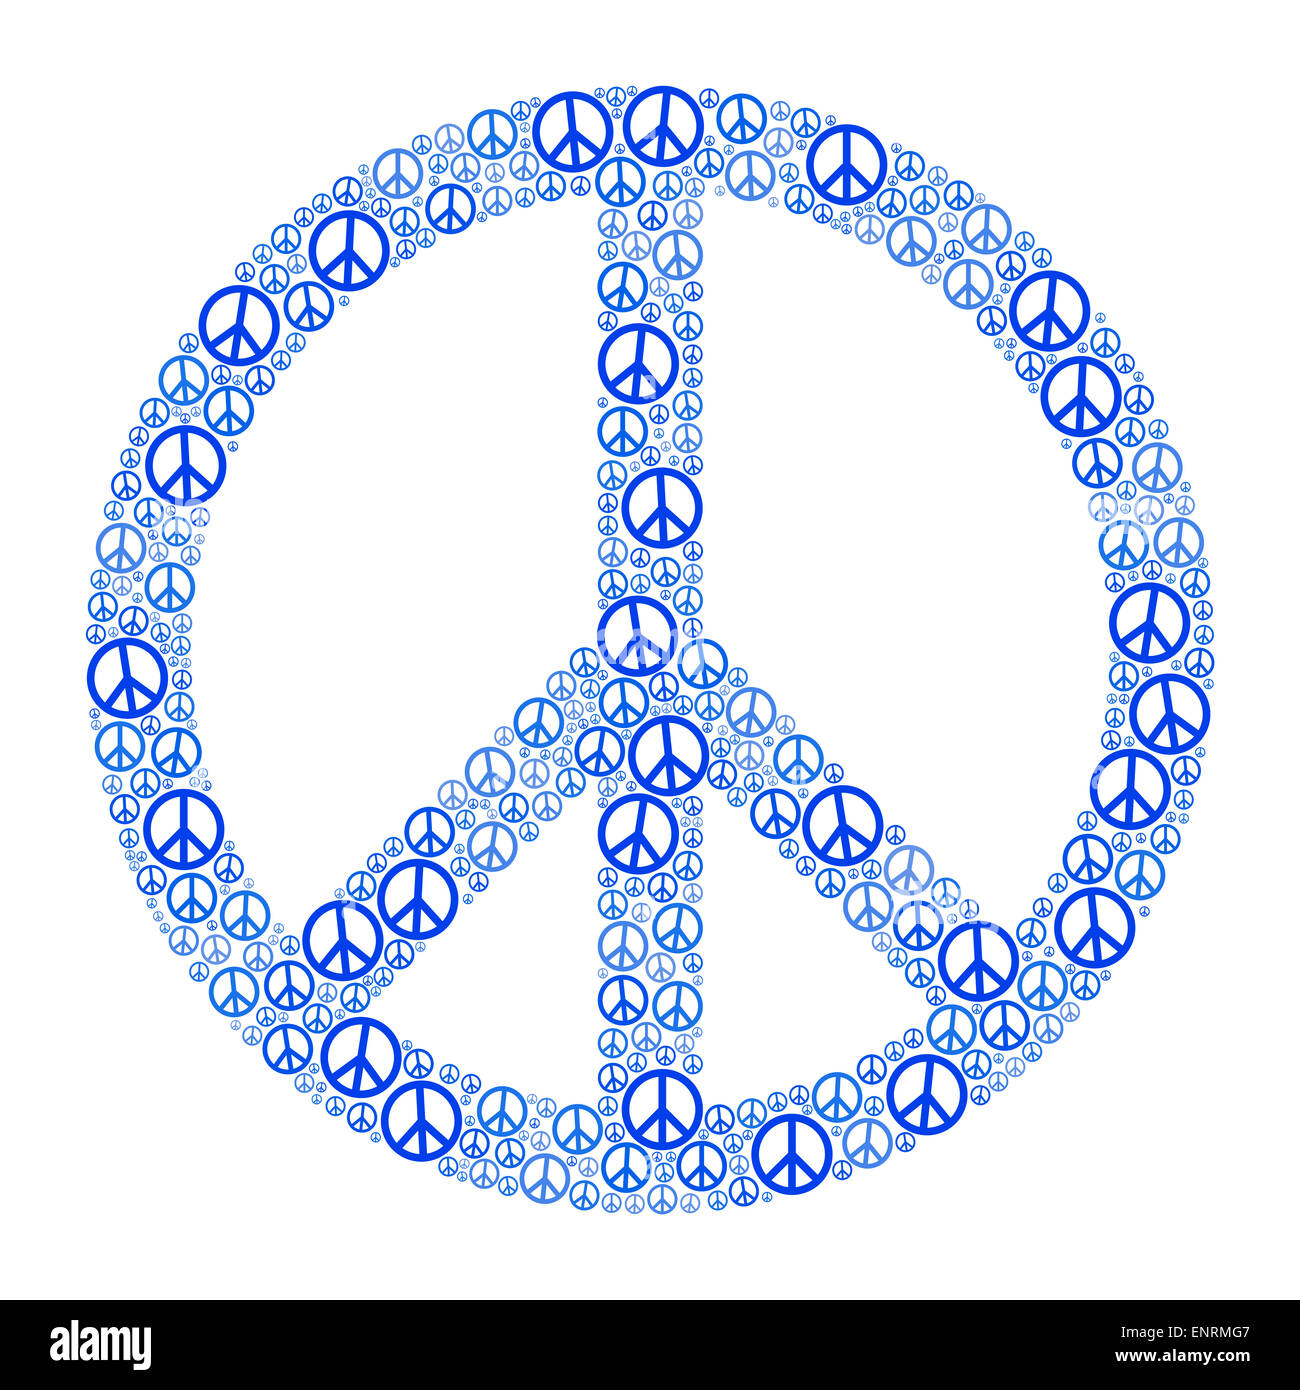 Blue Peace Sign formed by many small peace symbols. Illustration on white background. Stock Photo